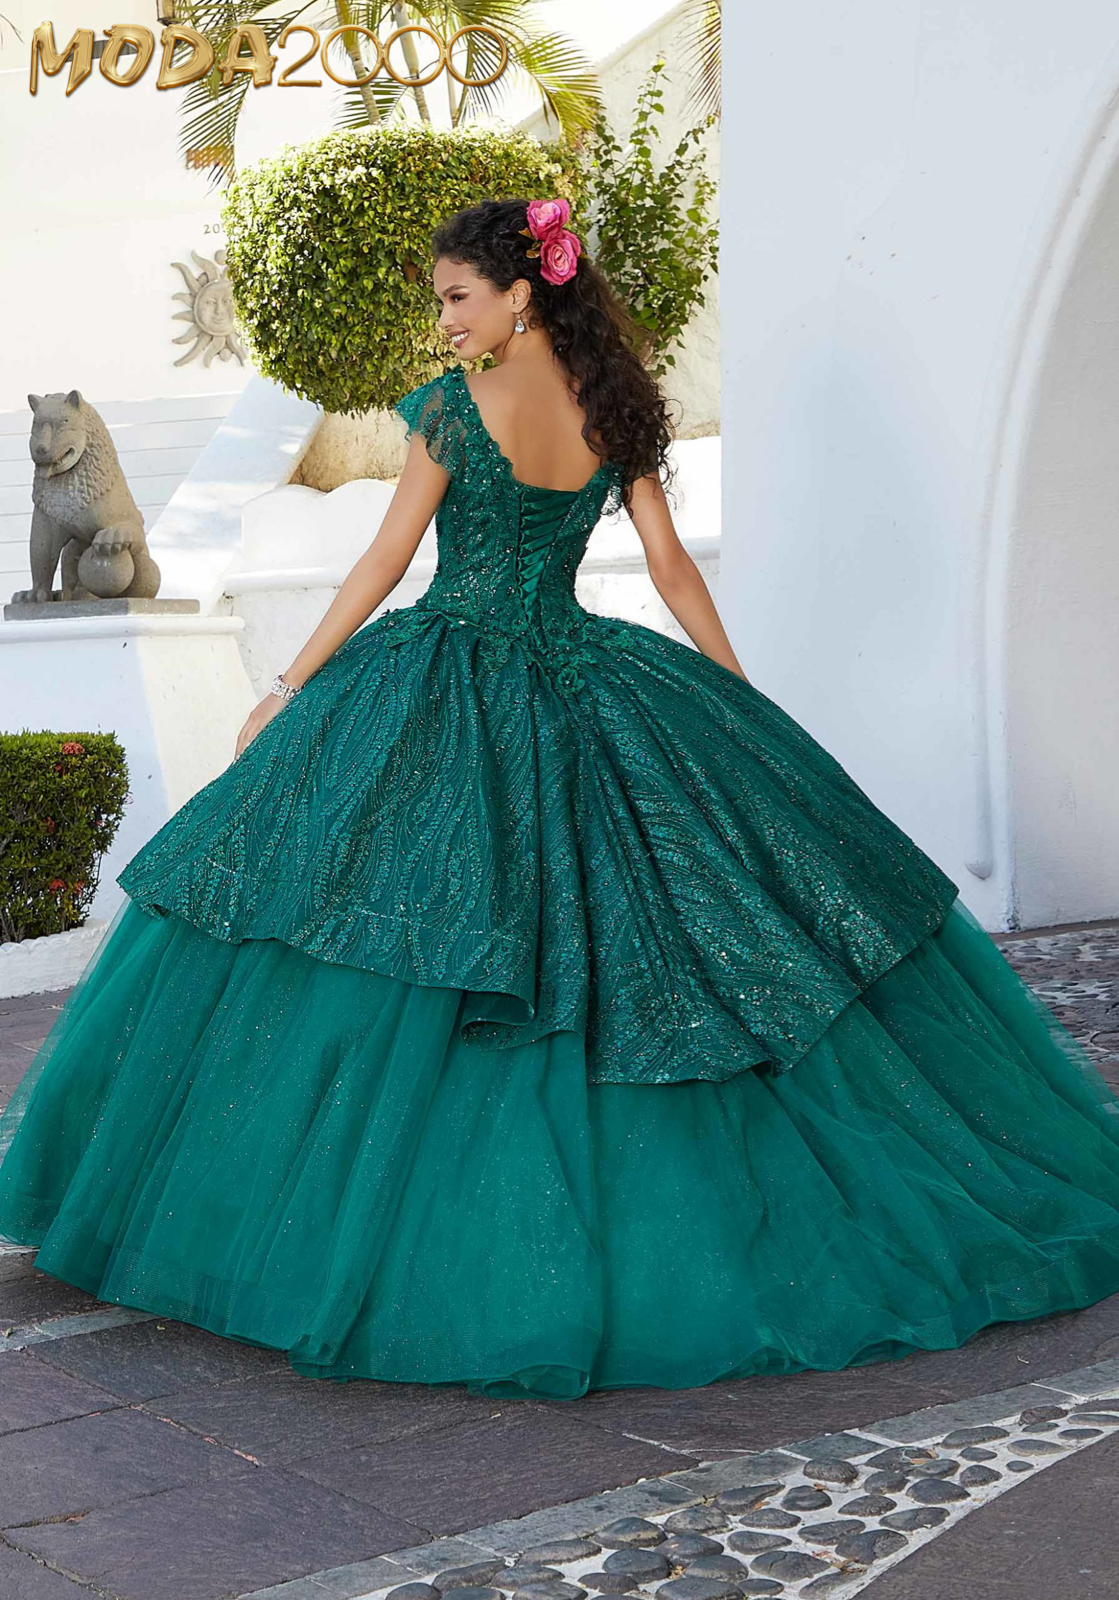 M2K60162 | Crystal Beaded Patterned Glitter over Sparkle Tulle Quinceañera Dress